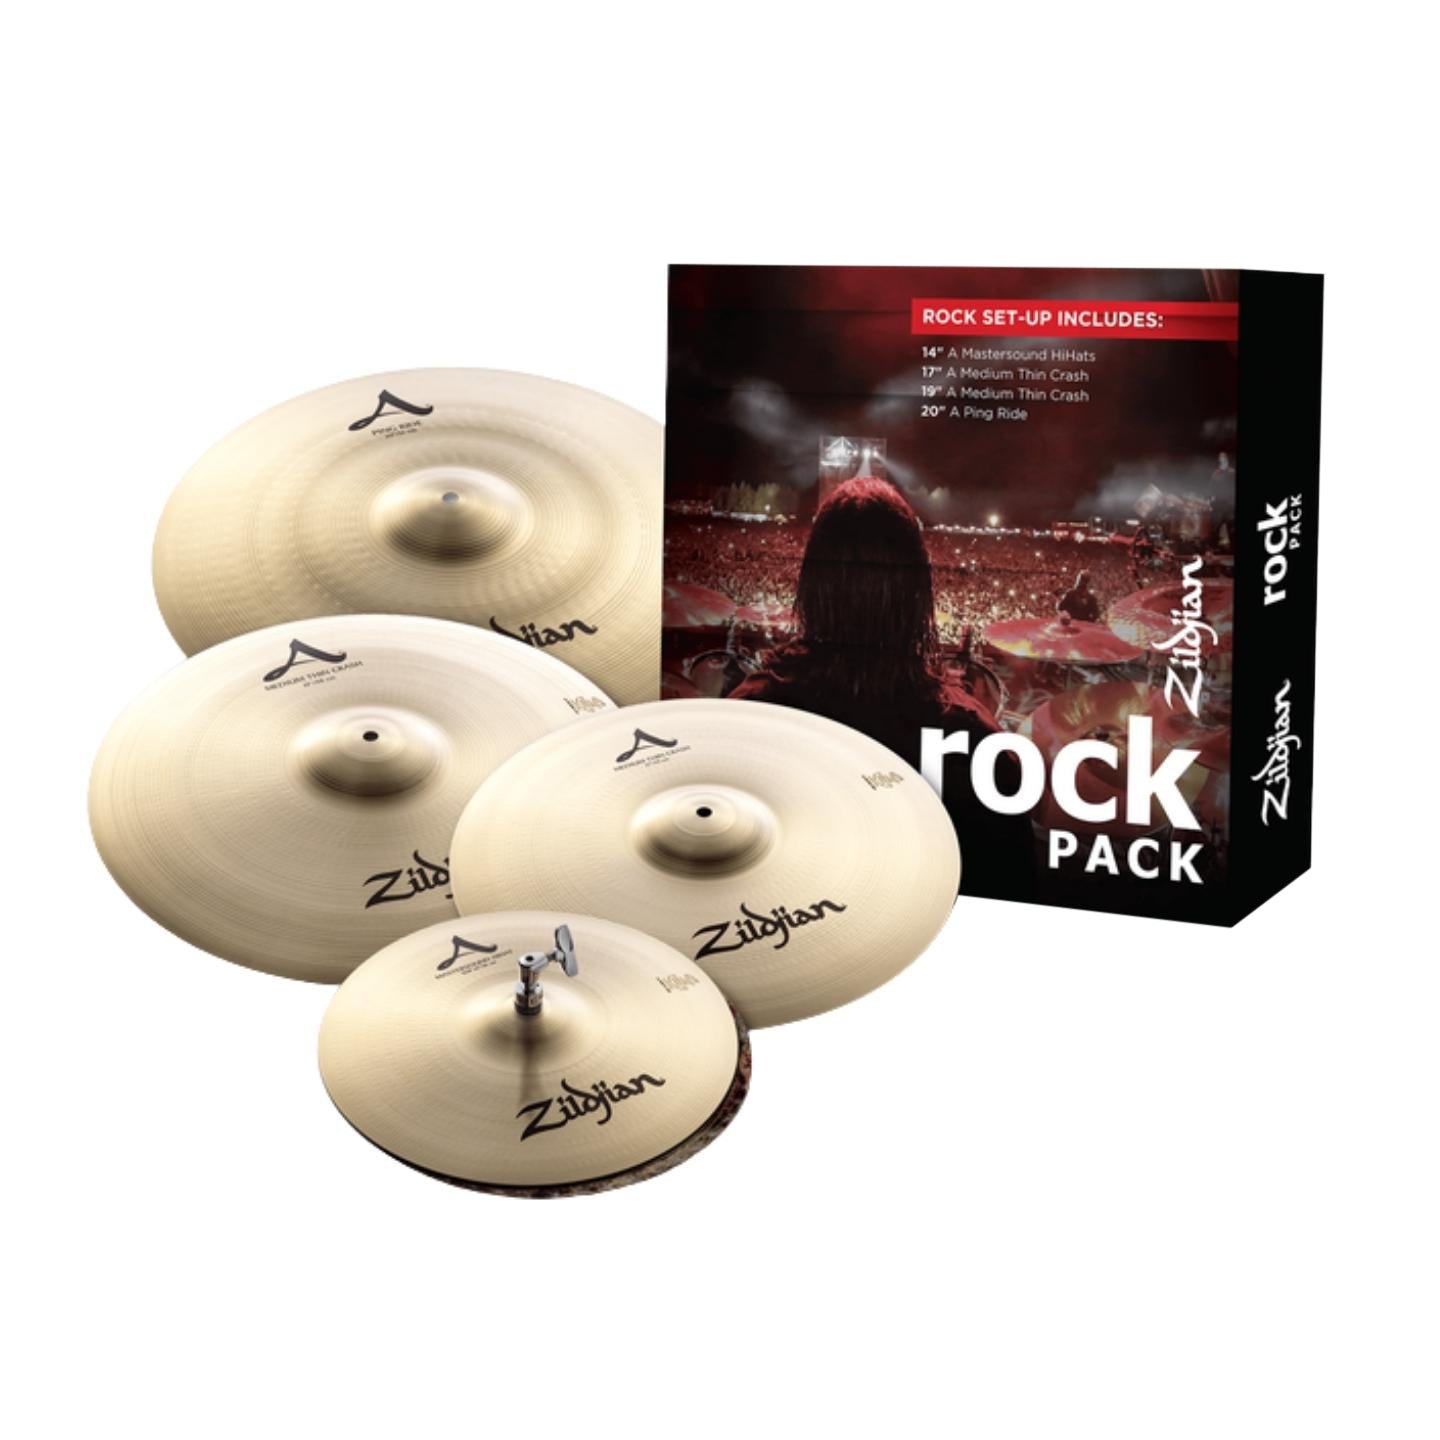 Zildjian A0801R A Rock Pack 4-piece Cymbal Set with 14" Hi-hats, 17" & 19" Crashes, 20" Ride for Drums